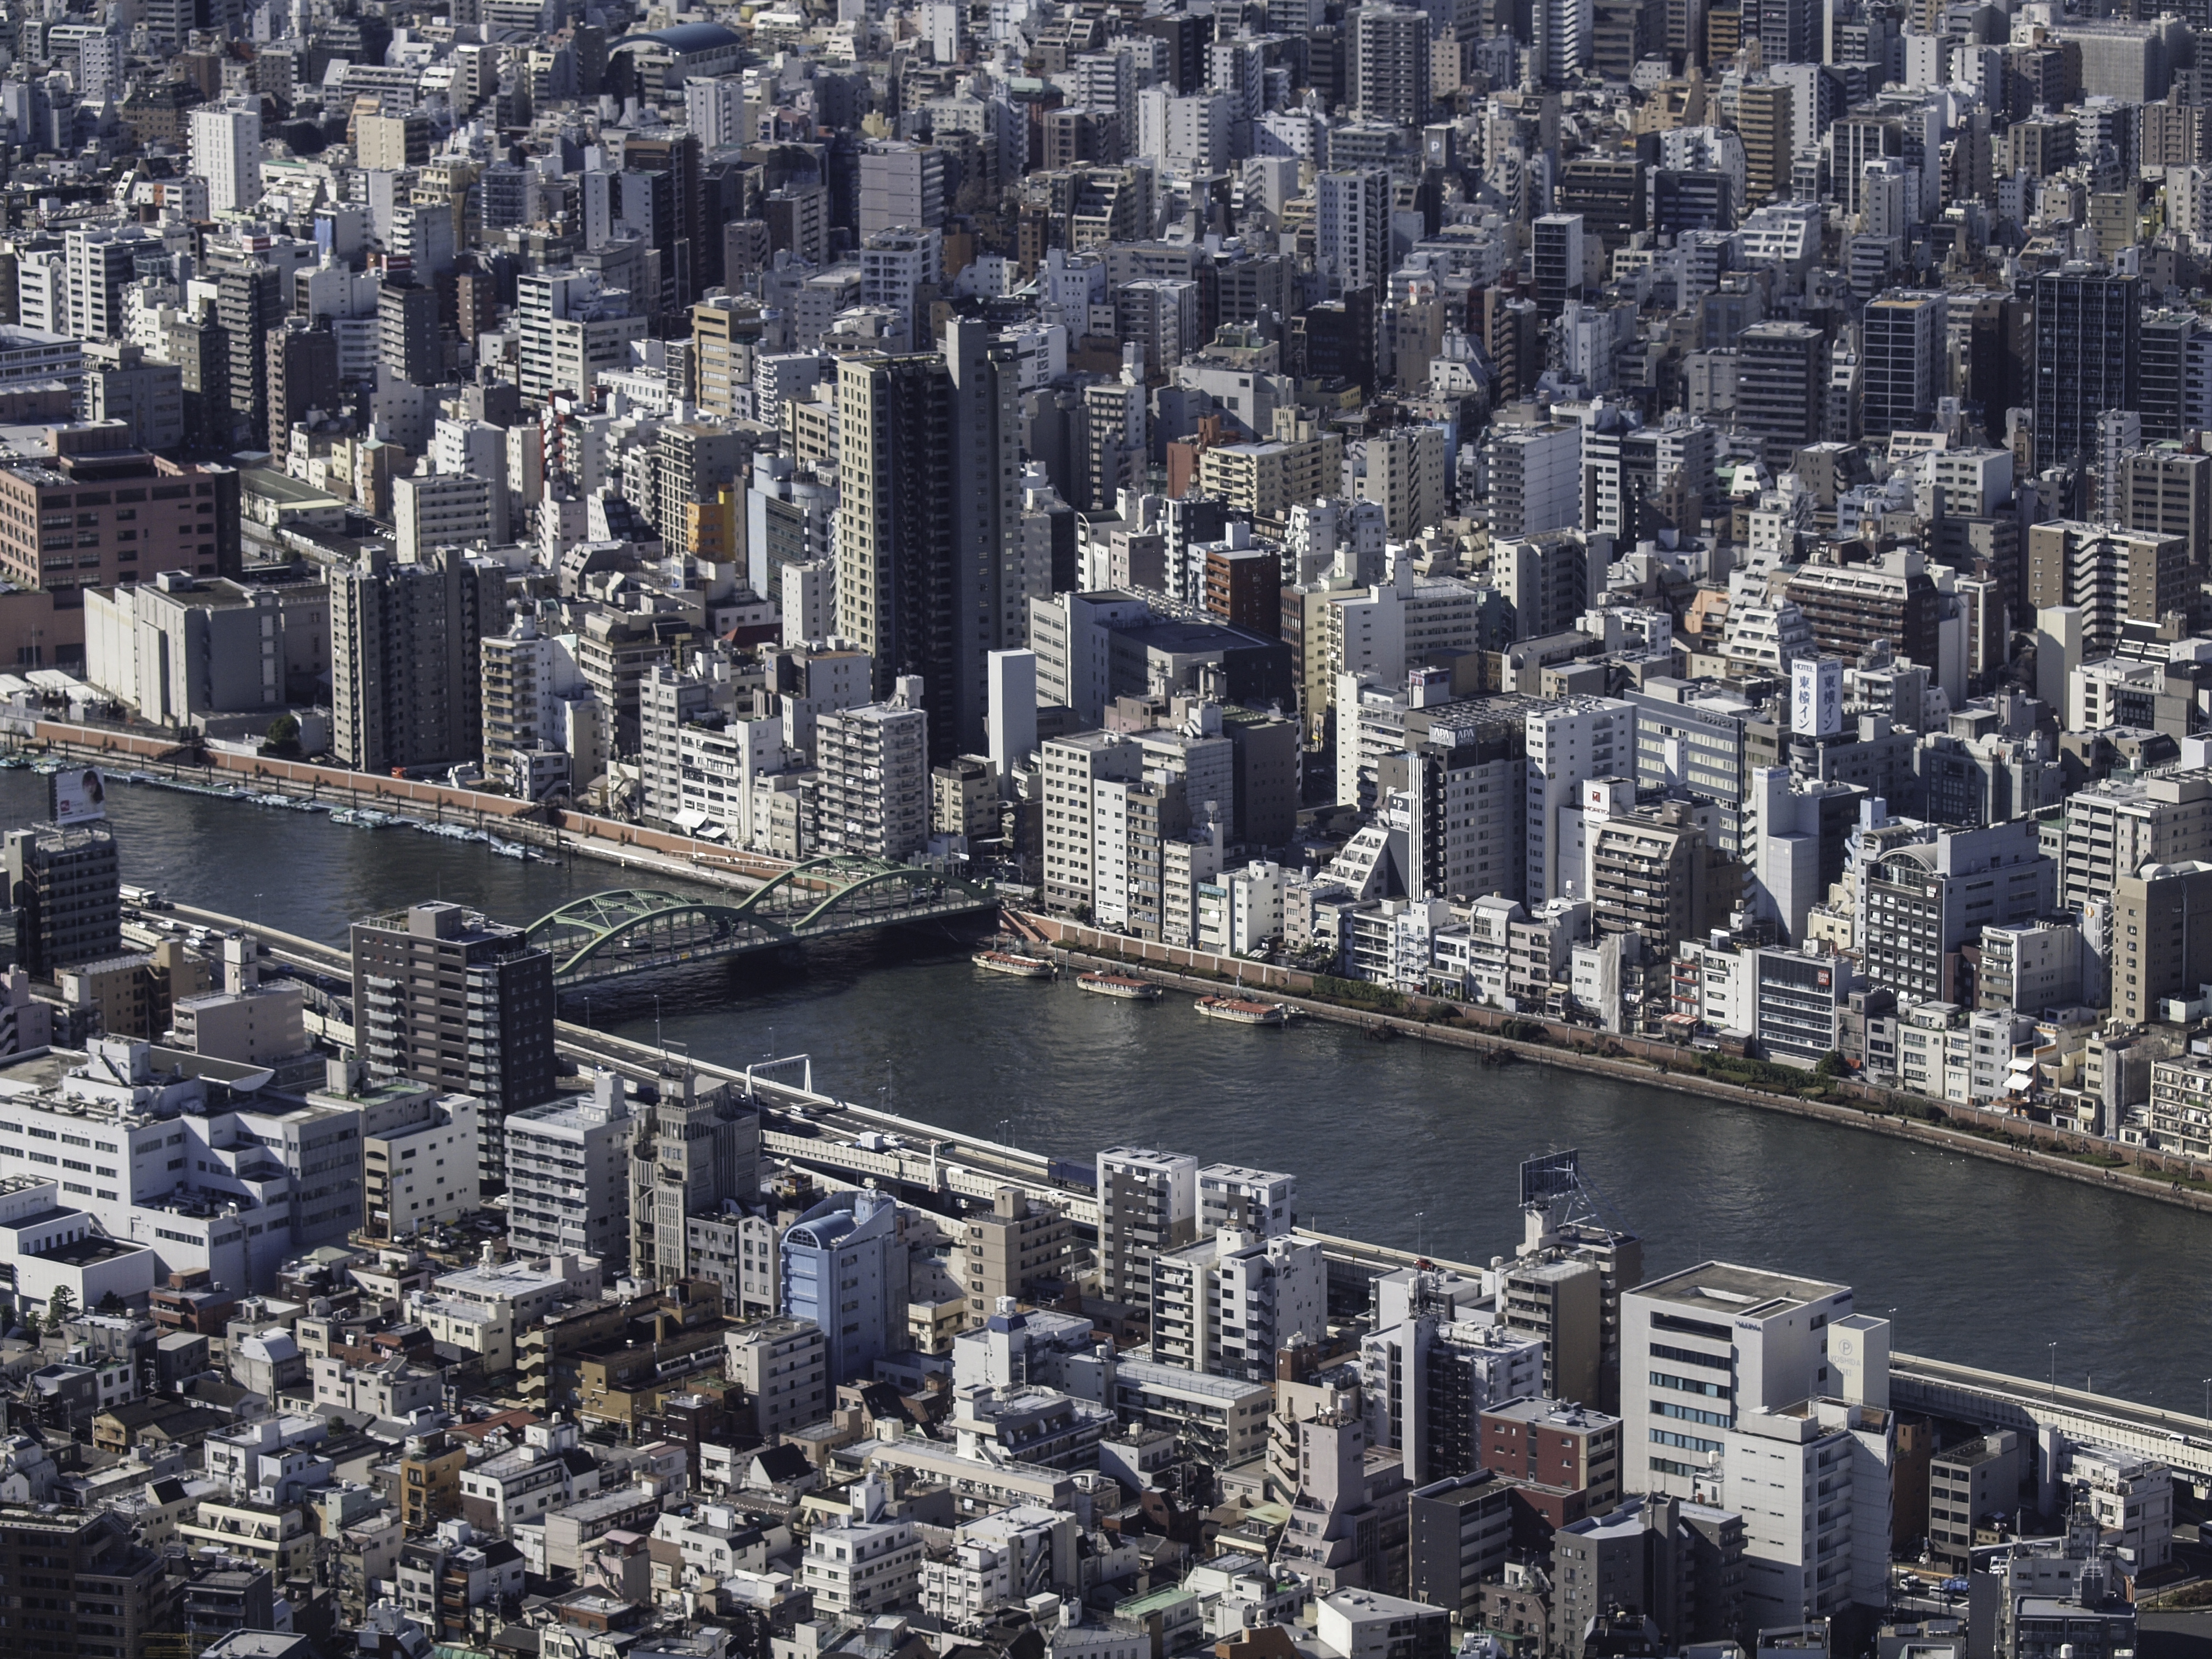 Capt Mondo's Photo Blog » Blog Archive » Downtown Tokyo and River as ...